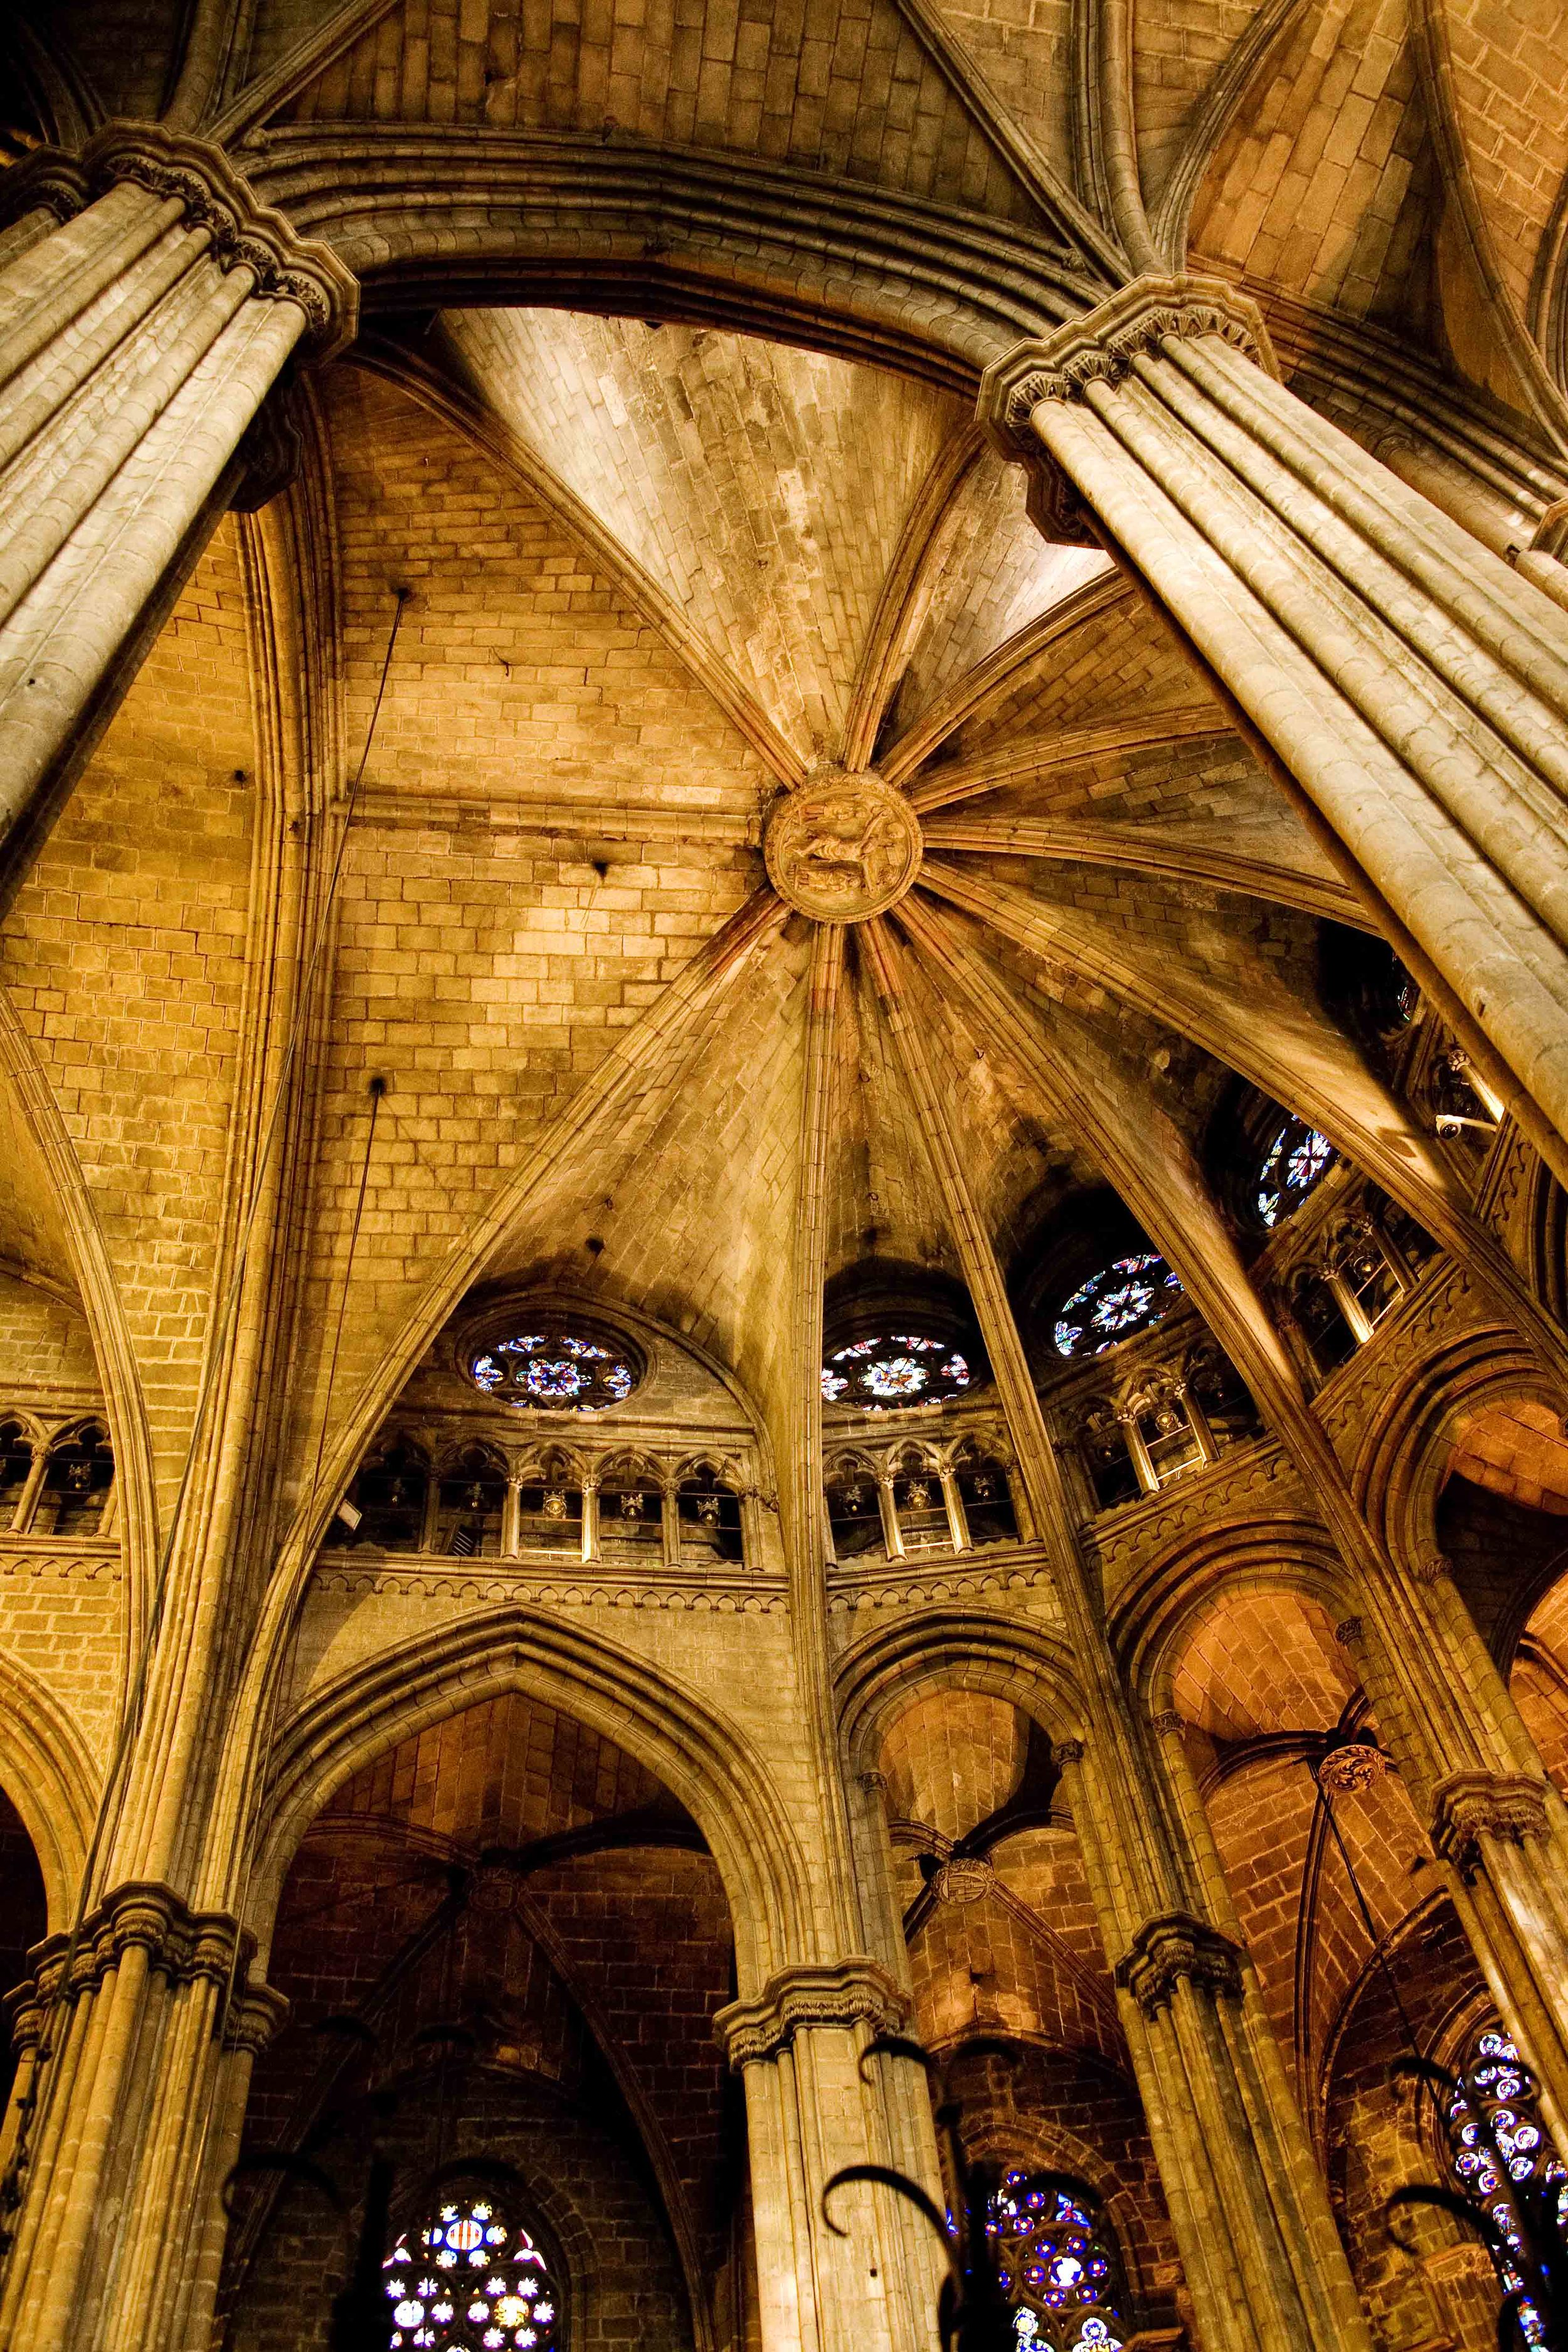 A-Cathedral Ceiling 3A.jpg